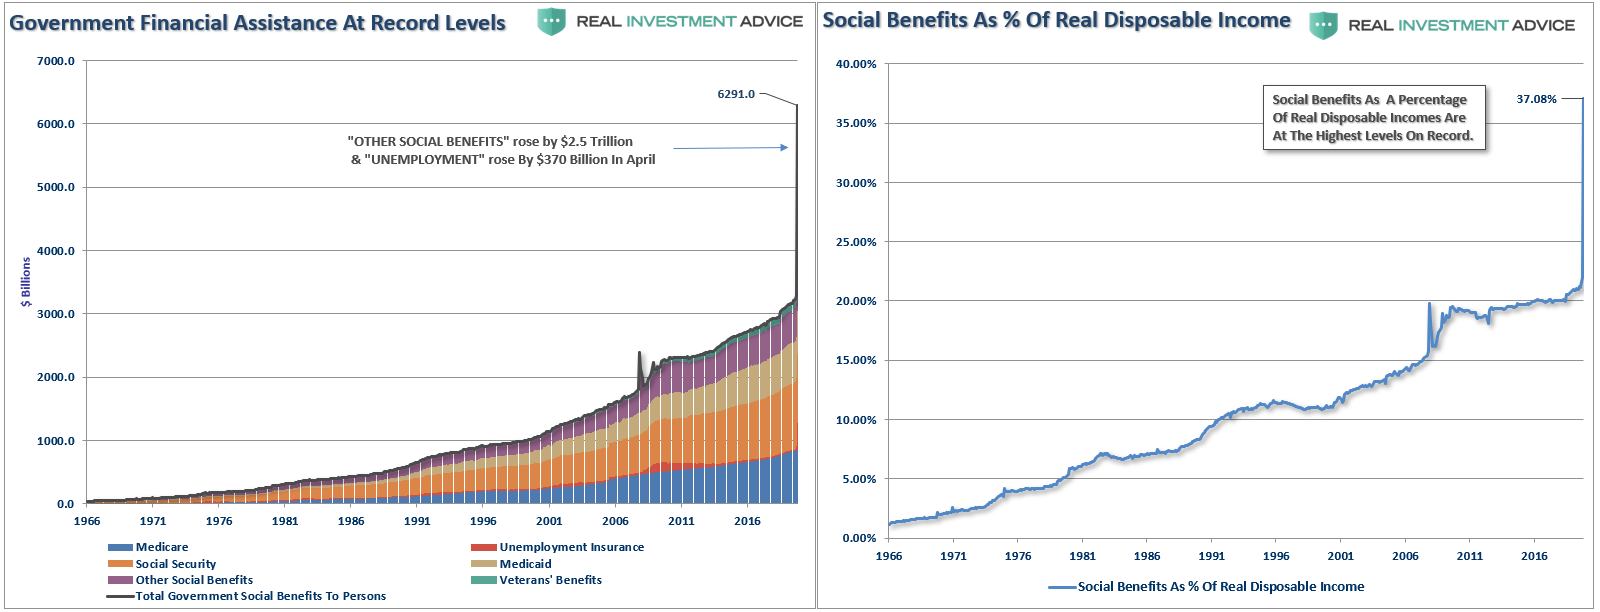 Social Security Benefits As % Of DPI